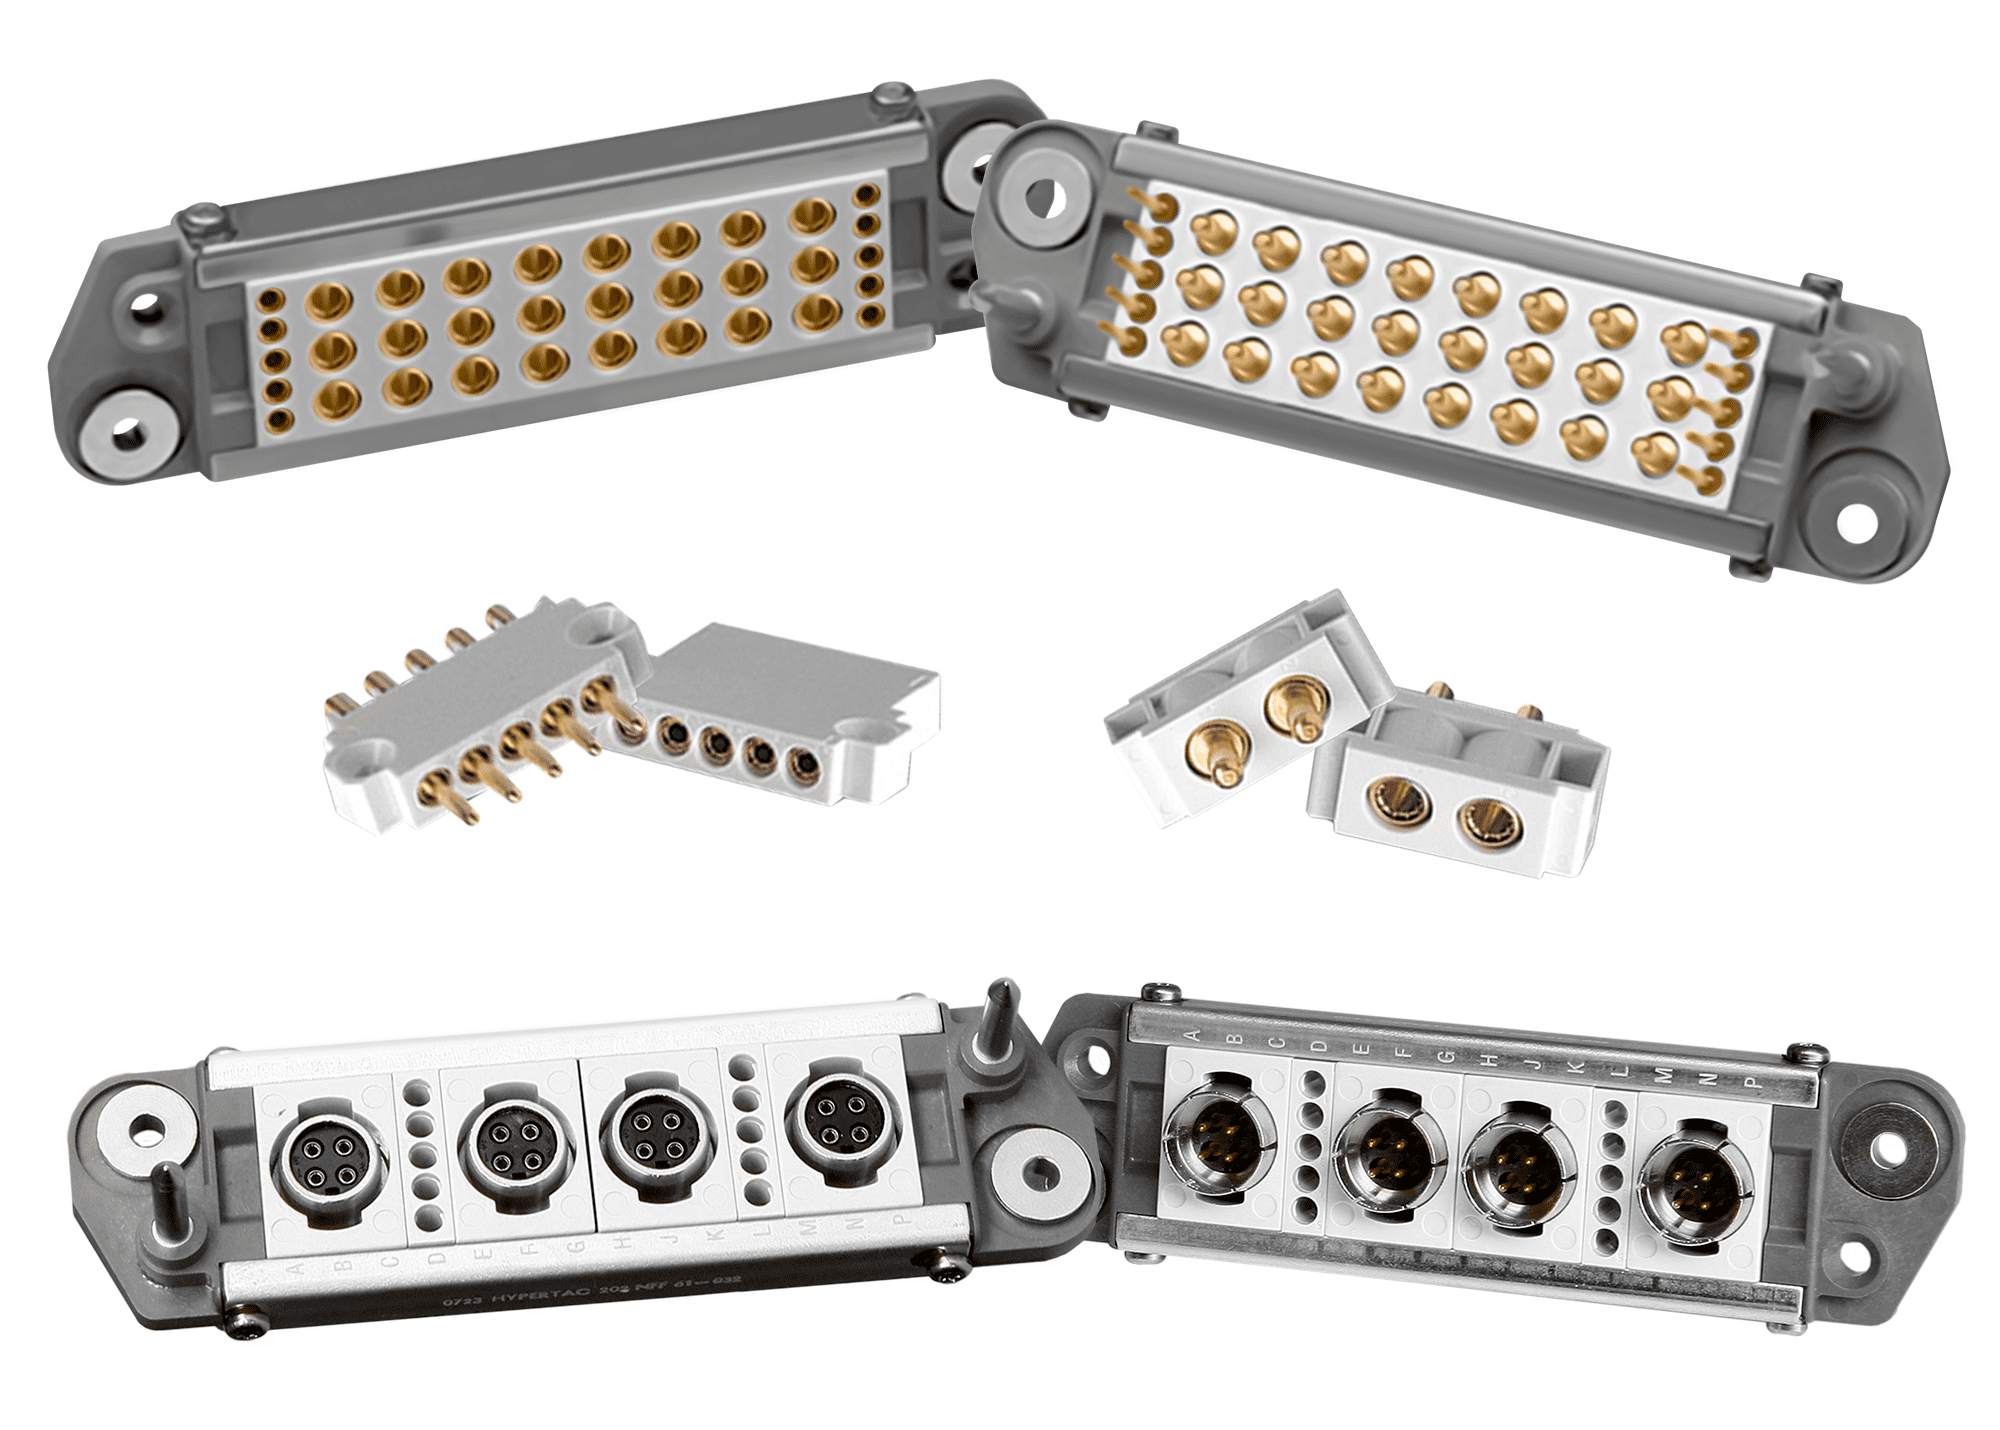 Smiths Interconnect LHS/LHZ Series rack and panel blind mating modular connectors